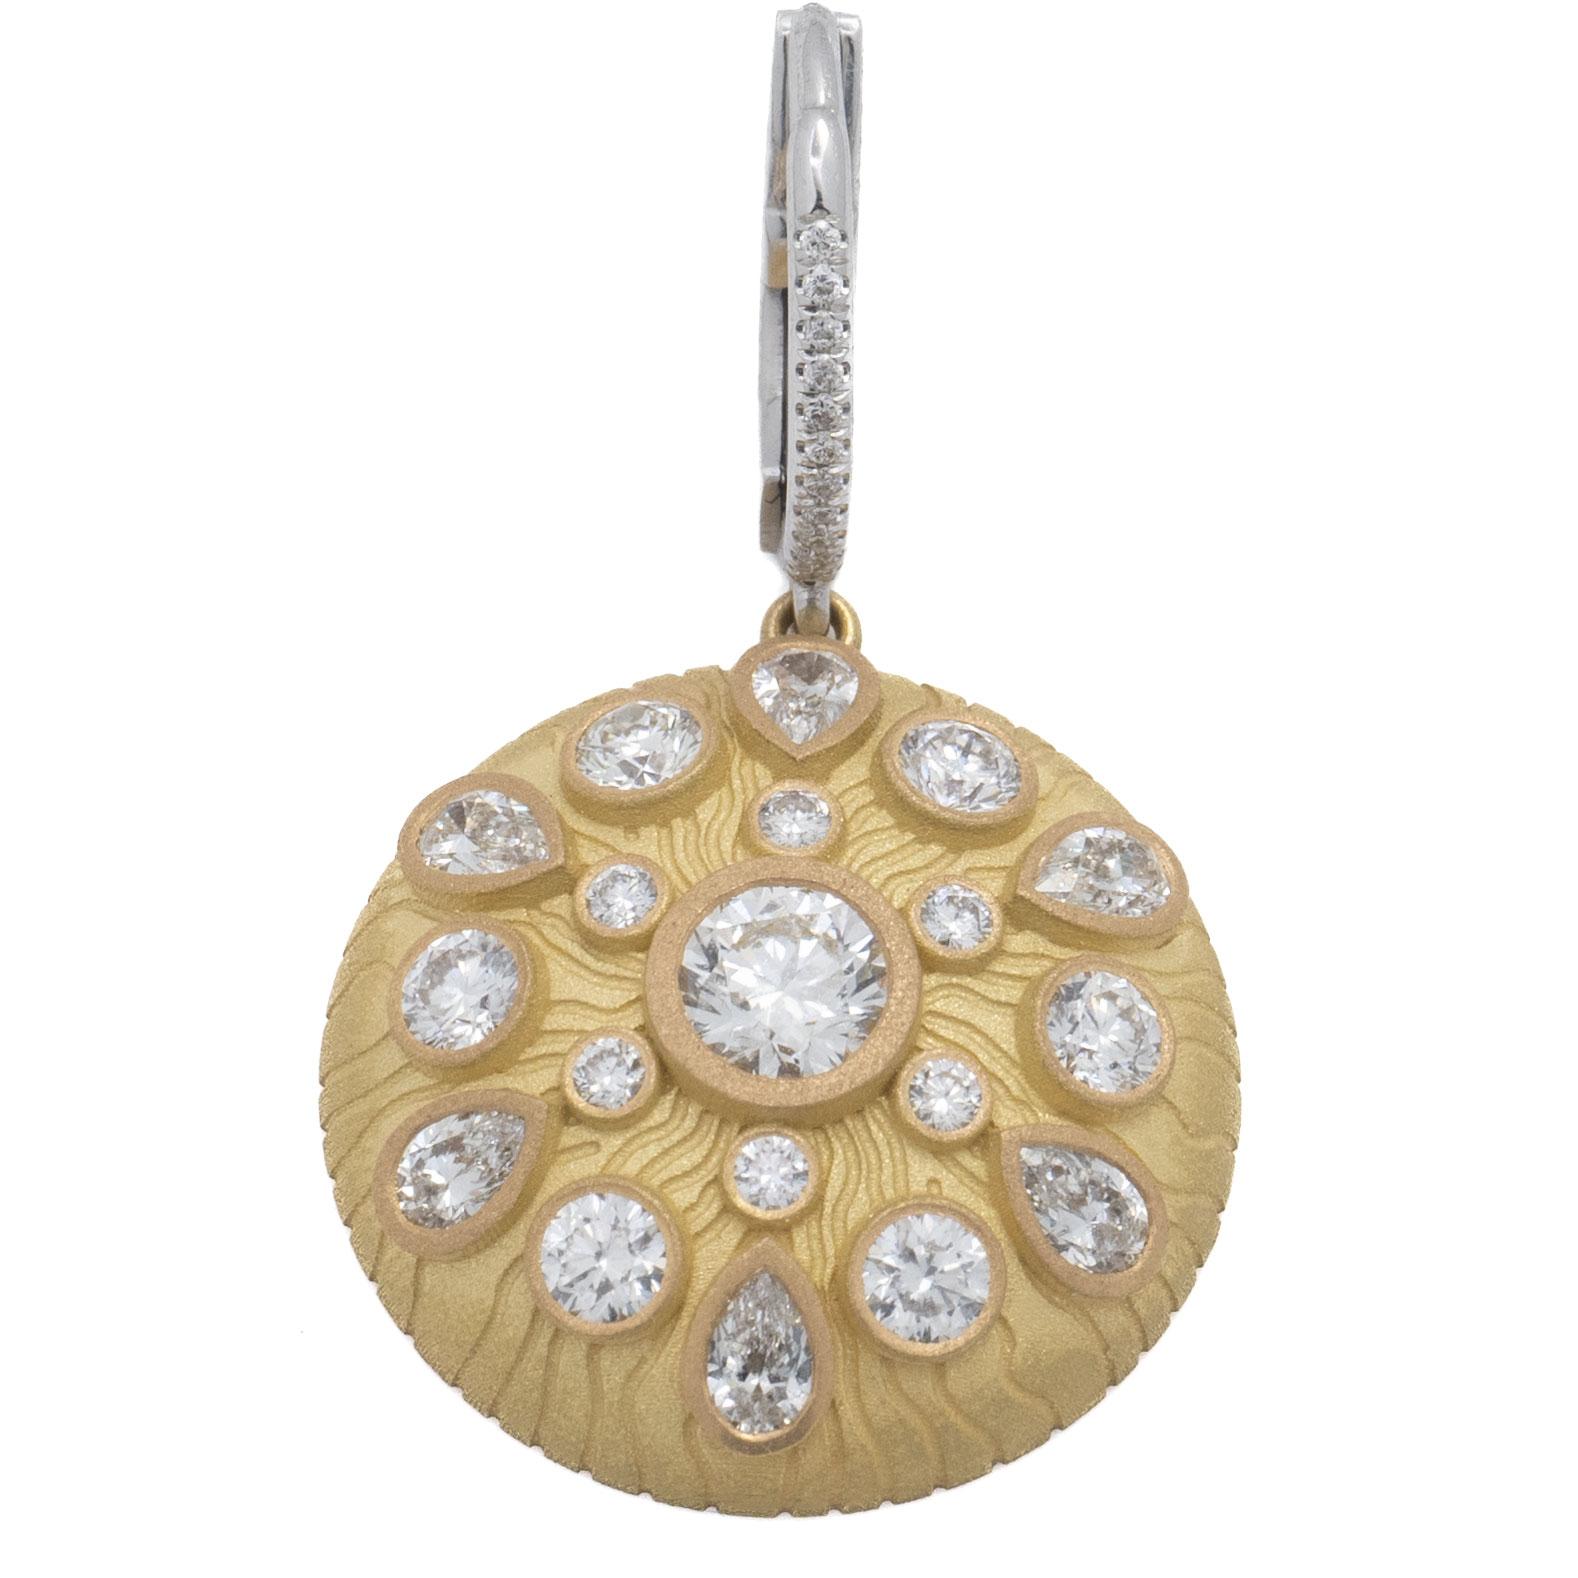 Medallion Earrings in 18k Yellow Gold and 18k White Gold
Middle Round Stones are GIA certified:

0.50ct G VS2 Round Shape Diamond GIA#5222778743
0.51ct G VS2 Round Shape Diamond GIA#2446824820

Total carat weight of smaller round stones: